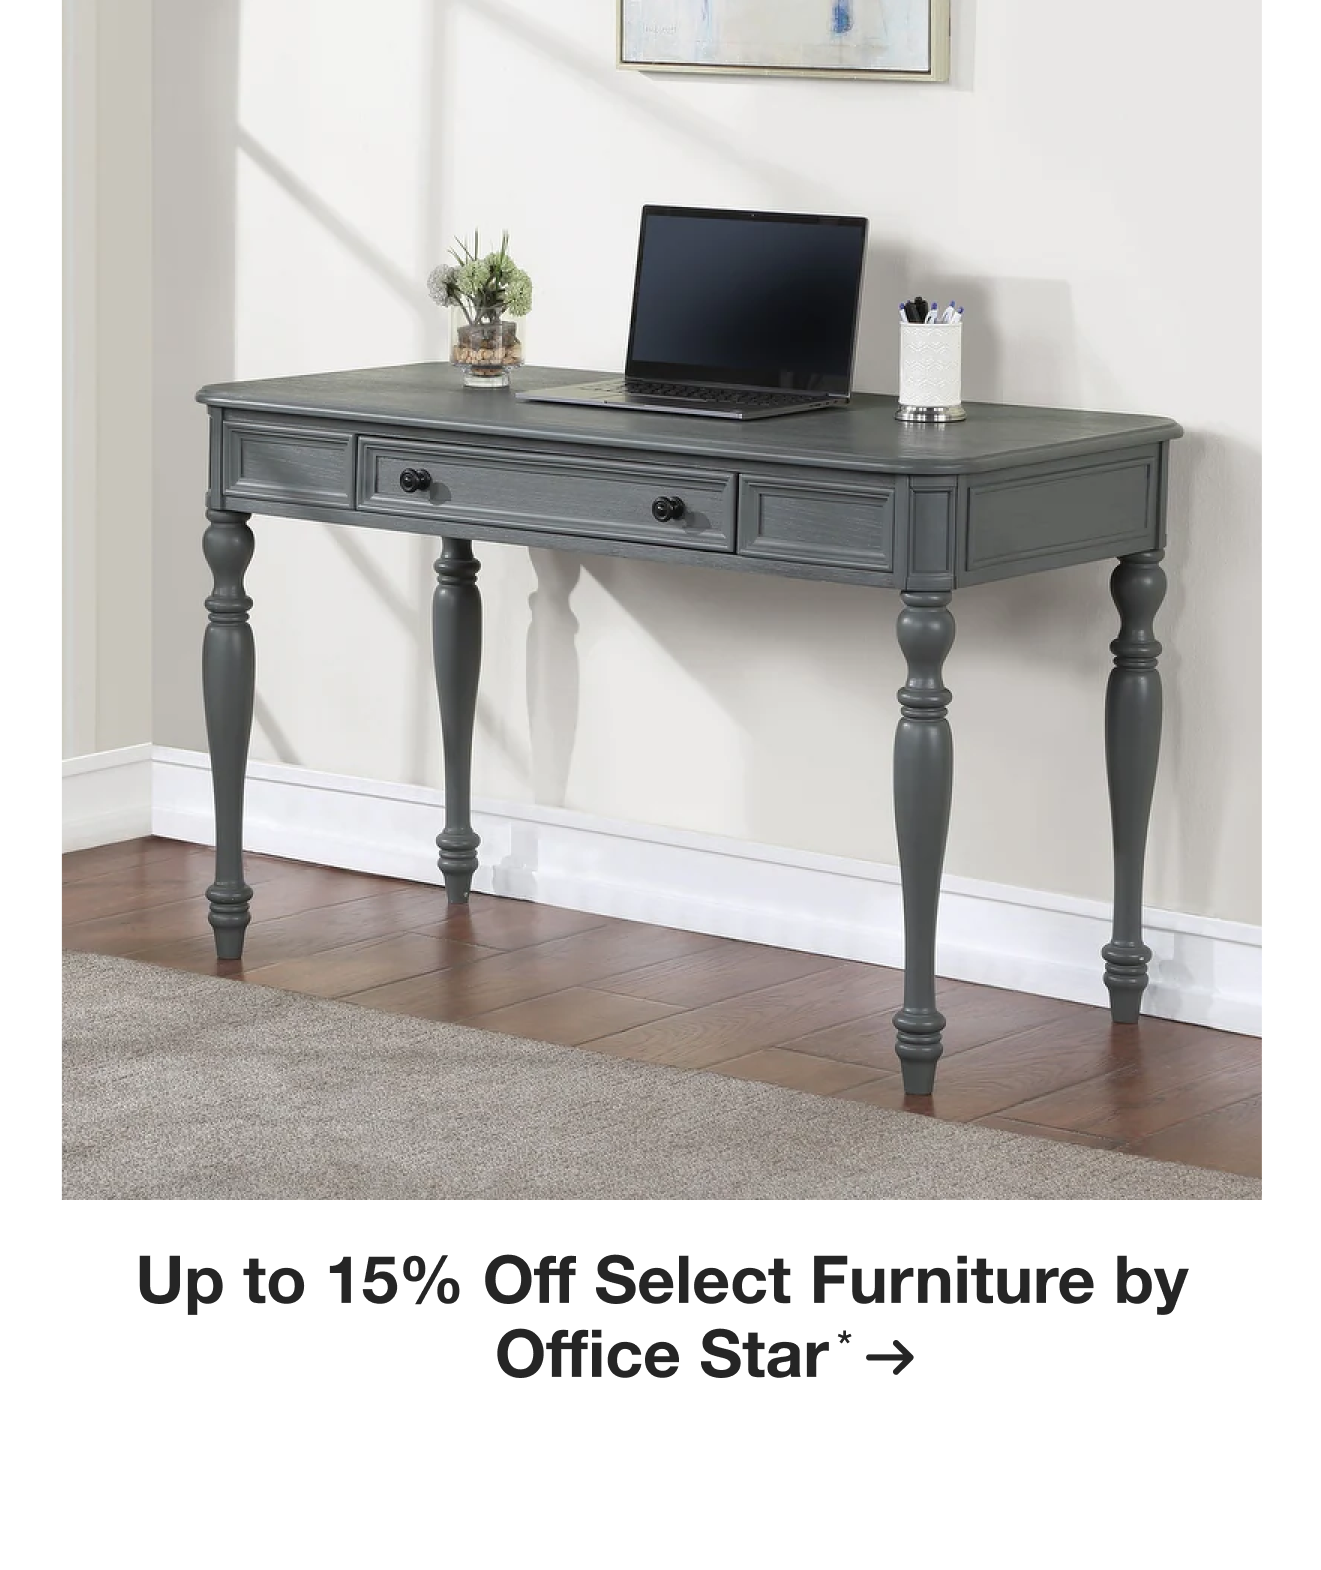 Up to 15% Off Select Furniture by Office Star*